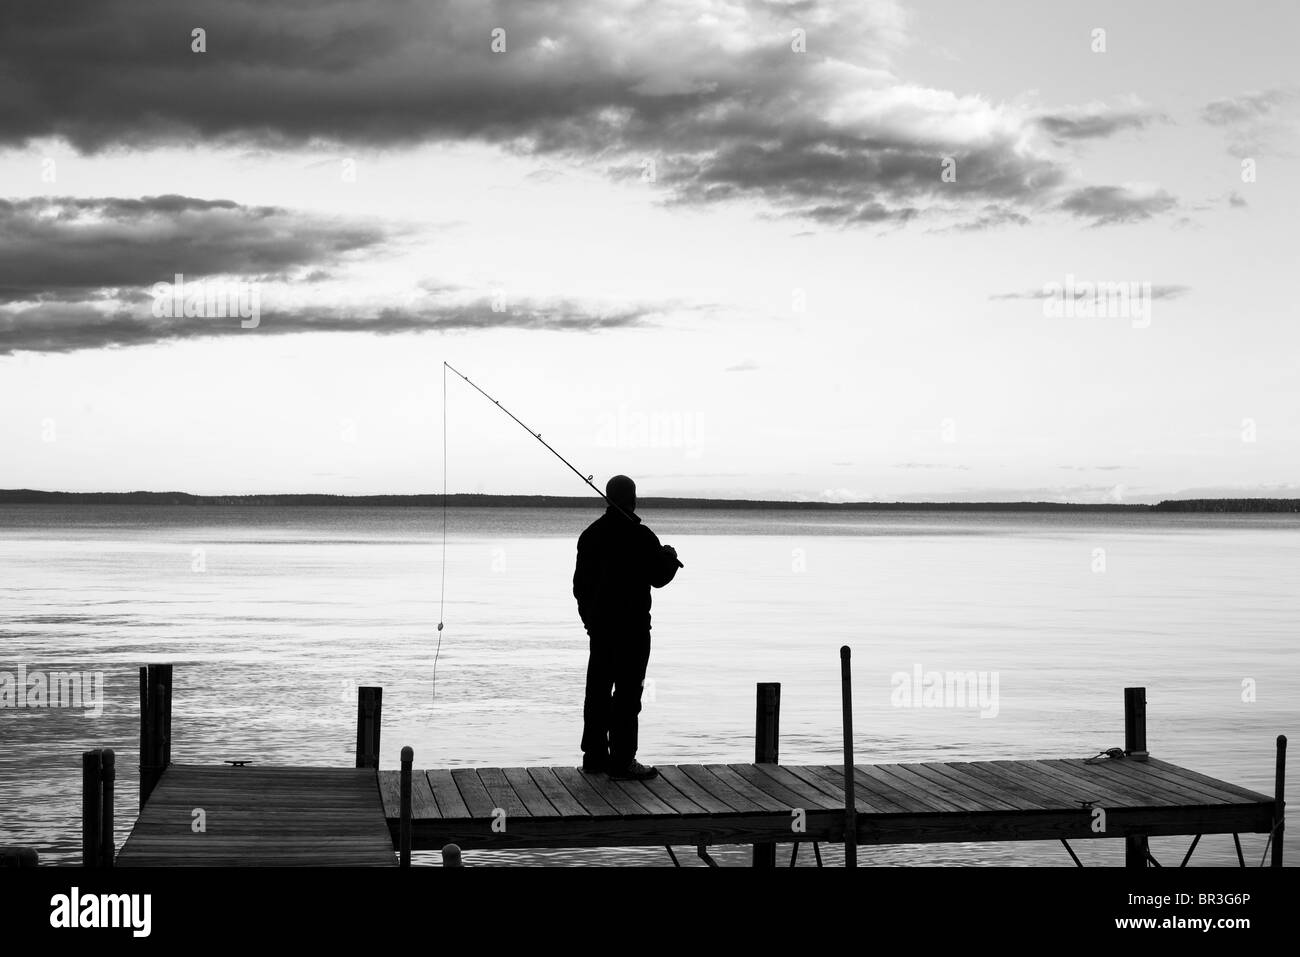 A black and white image of a man, silhouetted against a dramatic sky, holding a fishing rod. Stock Photo